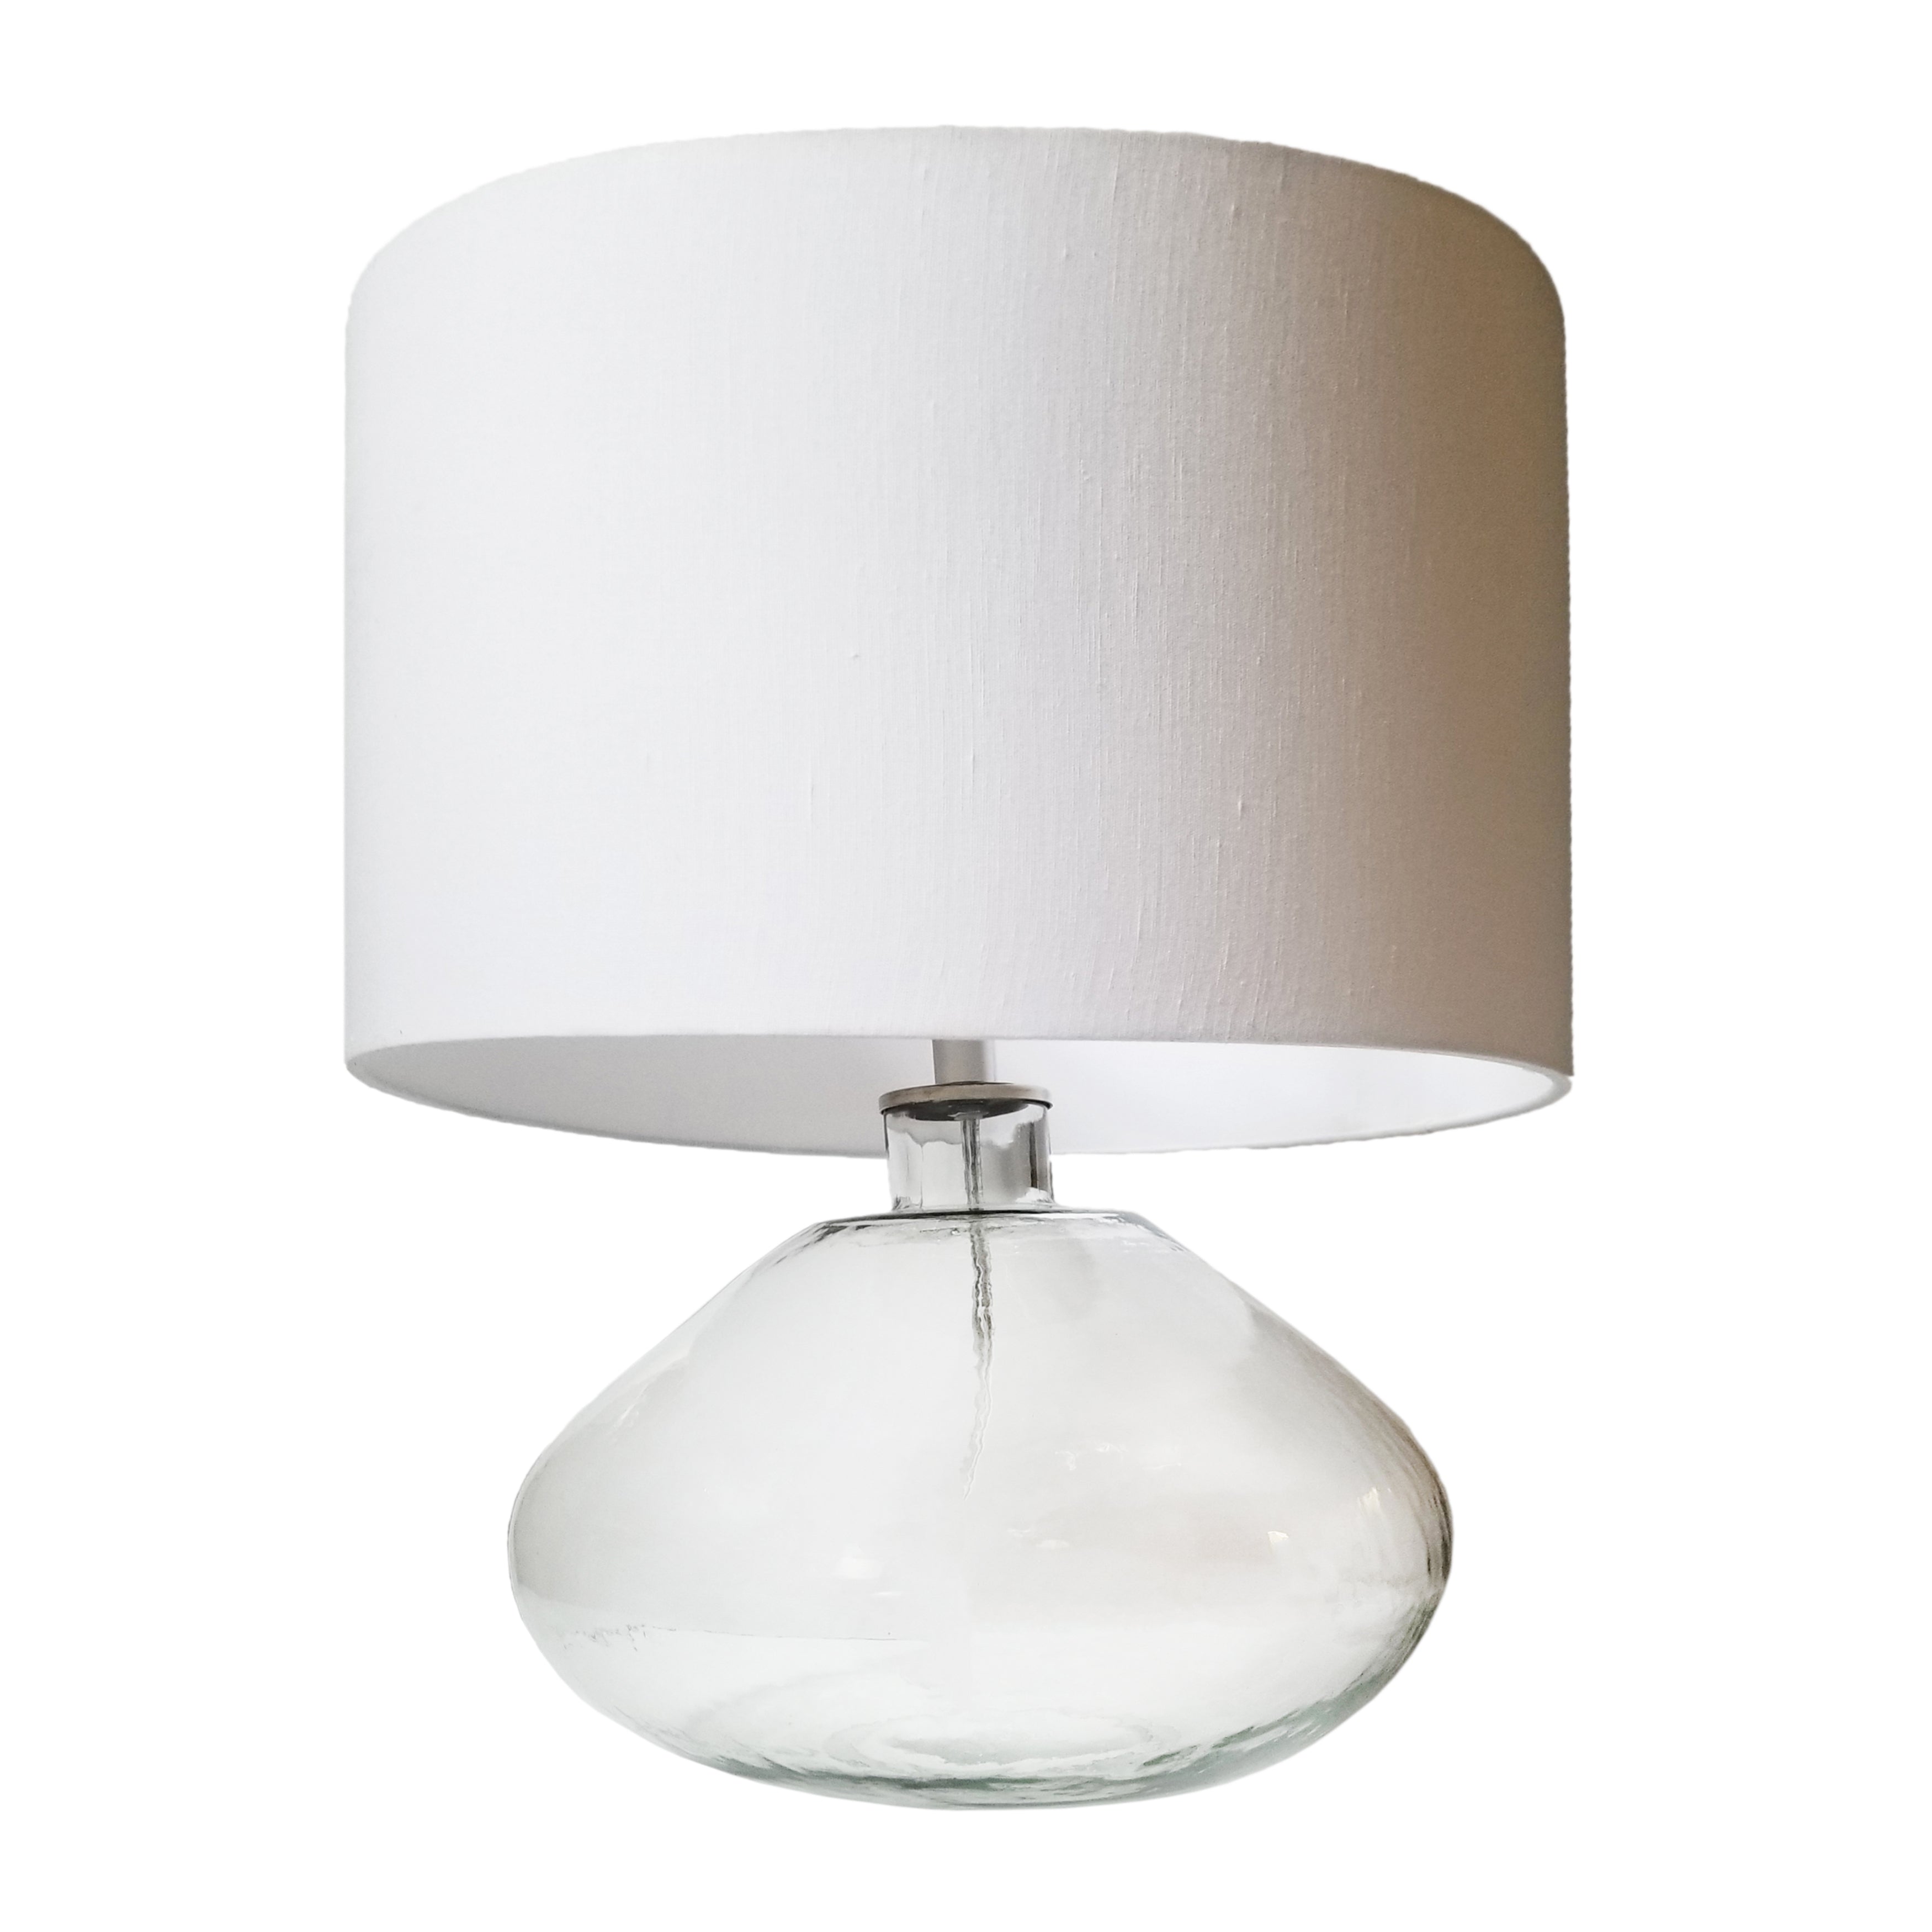 A modern take on a classic design, this shapely table lamp pairs easily with both minimalist and maximalist décor. This table lamp features a white linen shade with a hand-blown glass base. A classic, versatile addition to any décor theme, this accent light is beautiful placed on a nightstand, side table, or desk for additional lighting. Amethyst Home provides interior design, new home construction design consulting, vintage area rugs, and lighting in the Monterey metro area.